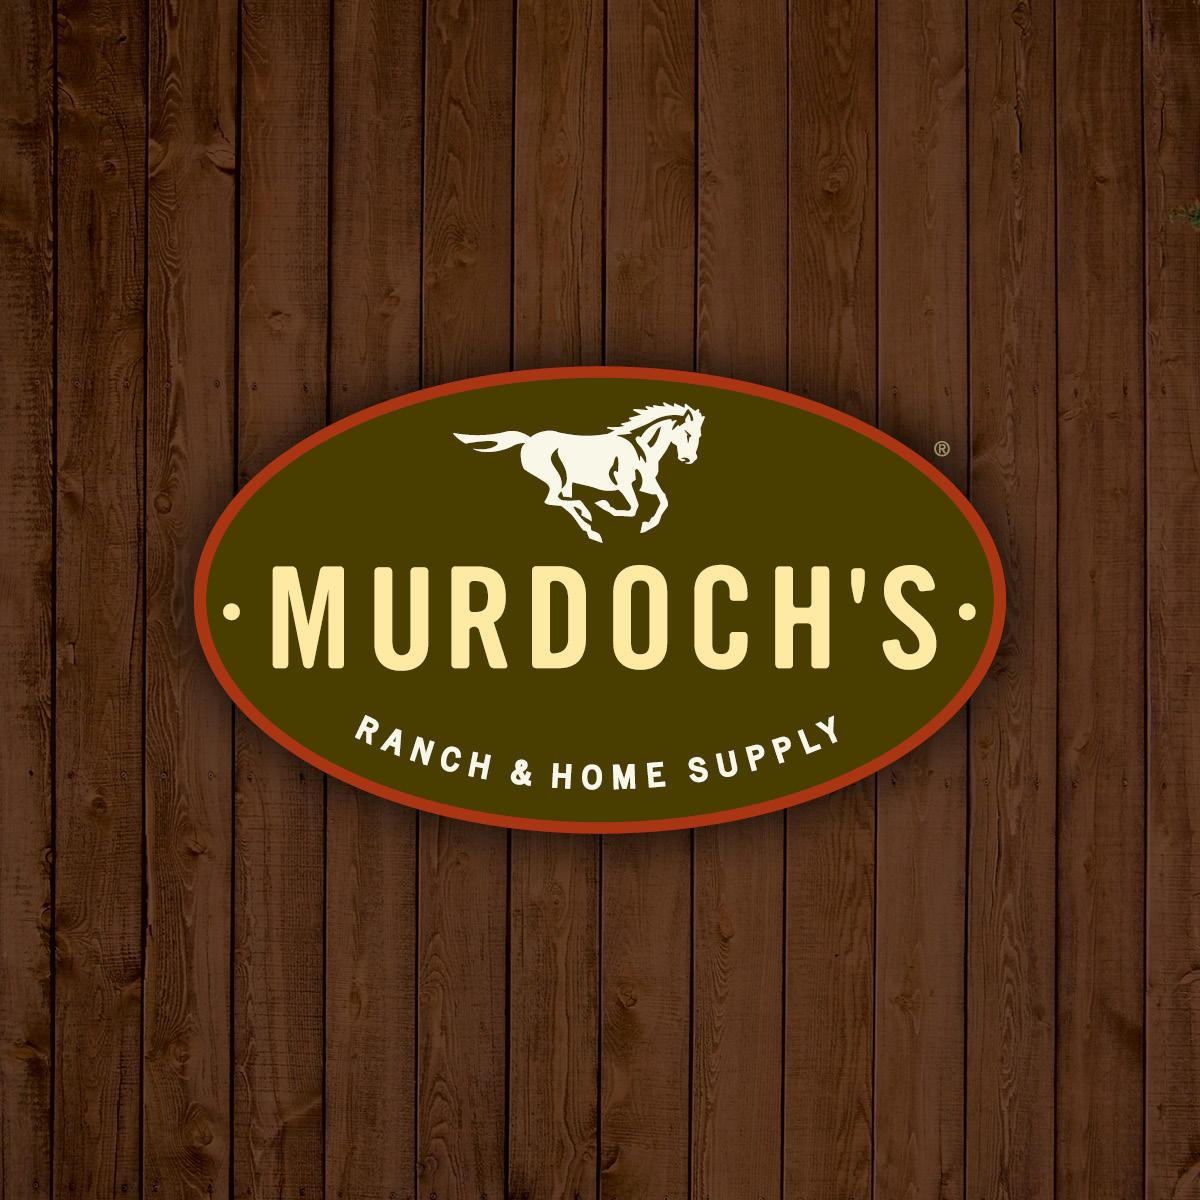 Murdoch's Ranch & Home Supply - Longmont, CO 80501 - (303)682-5111 | ShowMeLocal.com